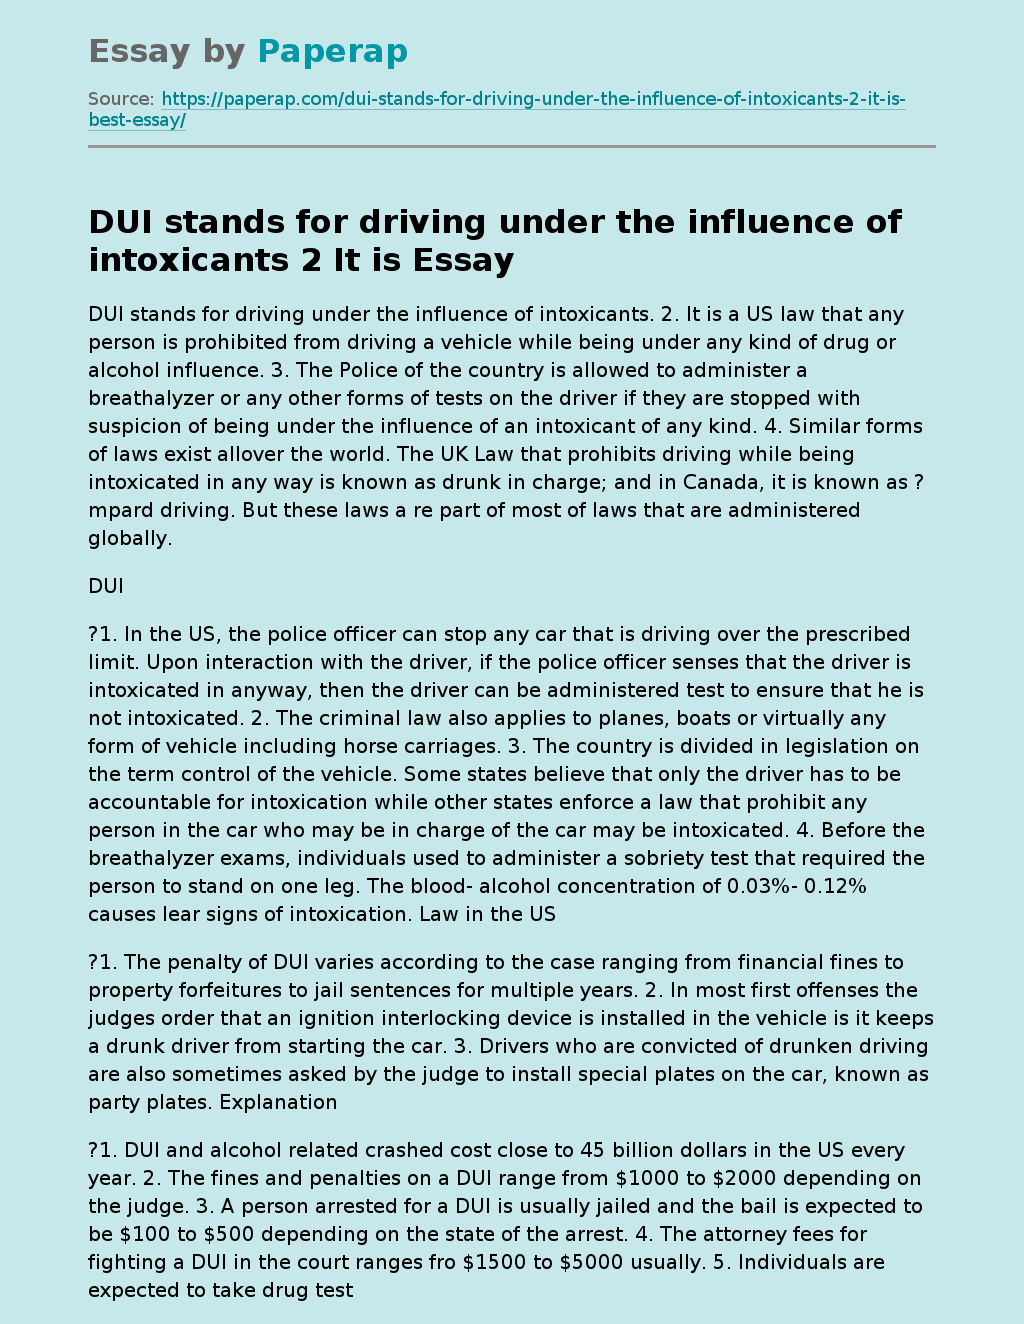 DUI stands for driving under the influence of intoxicants 2 It is